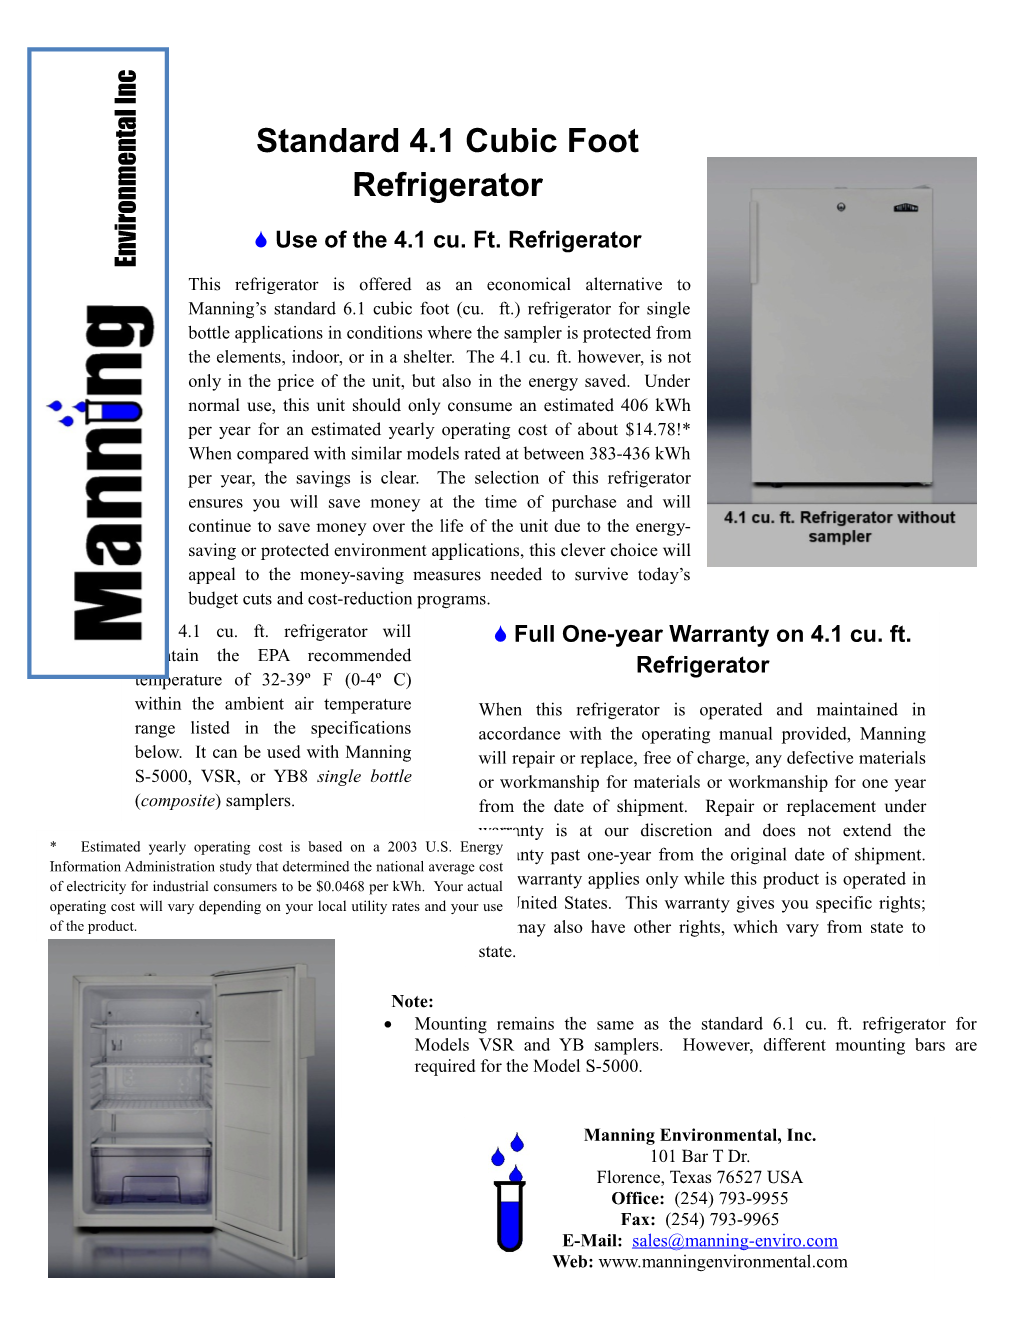 Use of the 4.1 Cu. Ft. Refrigerator